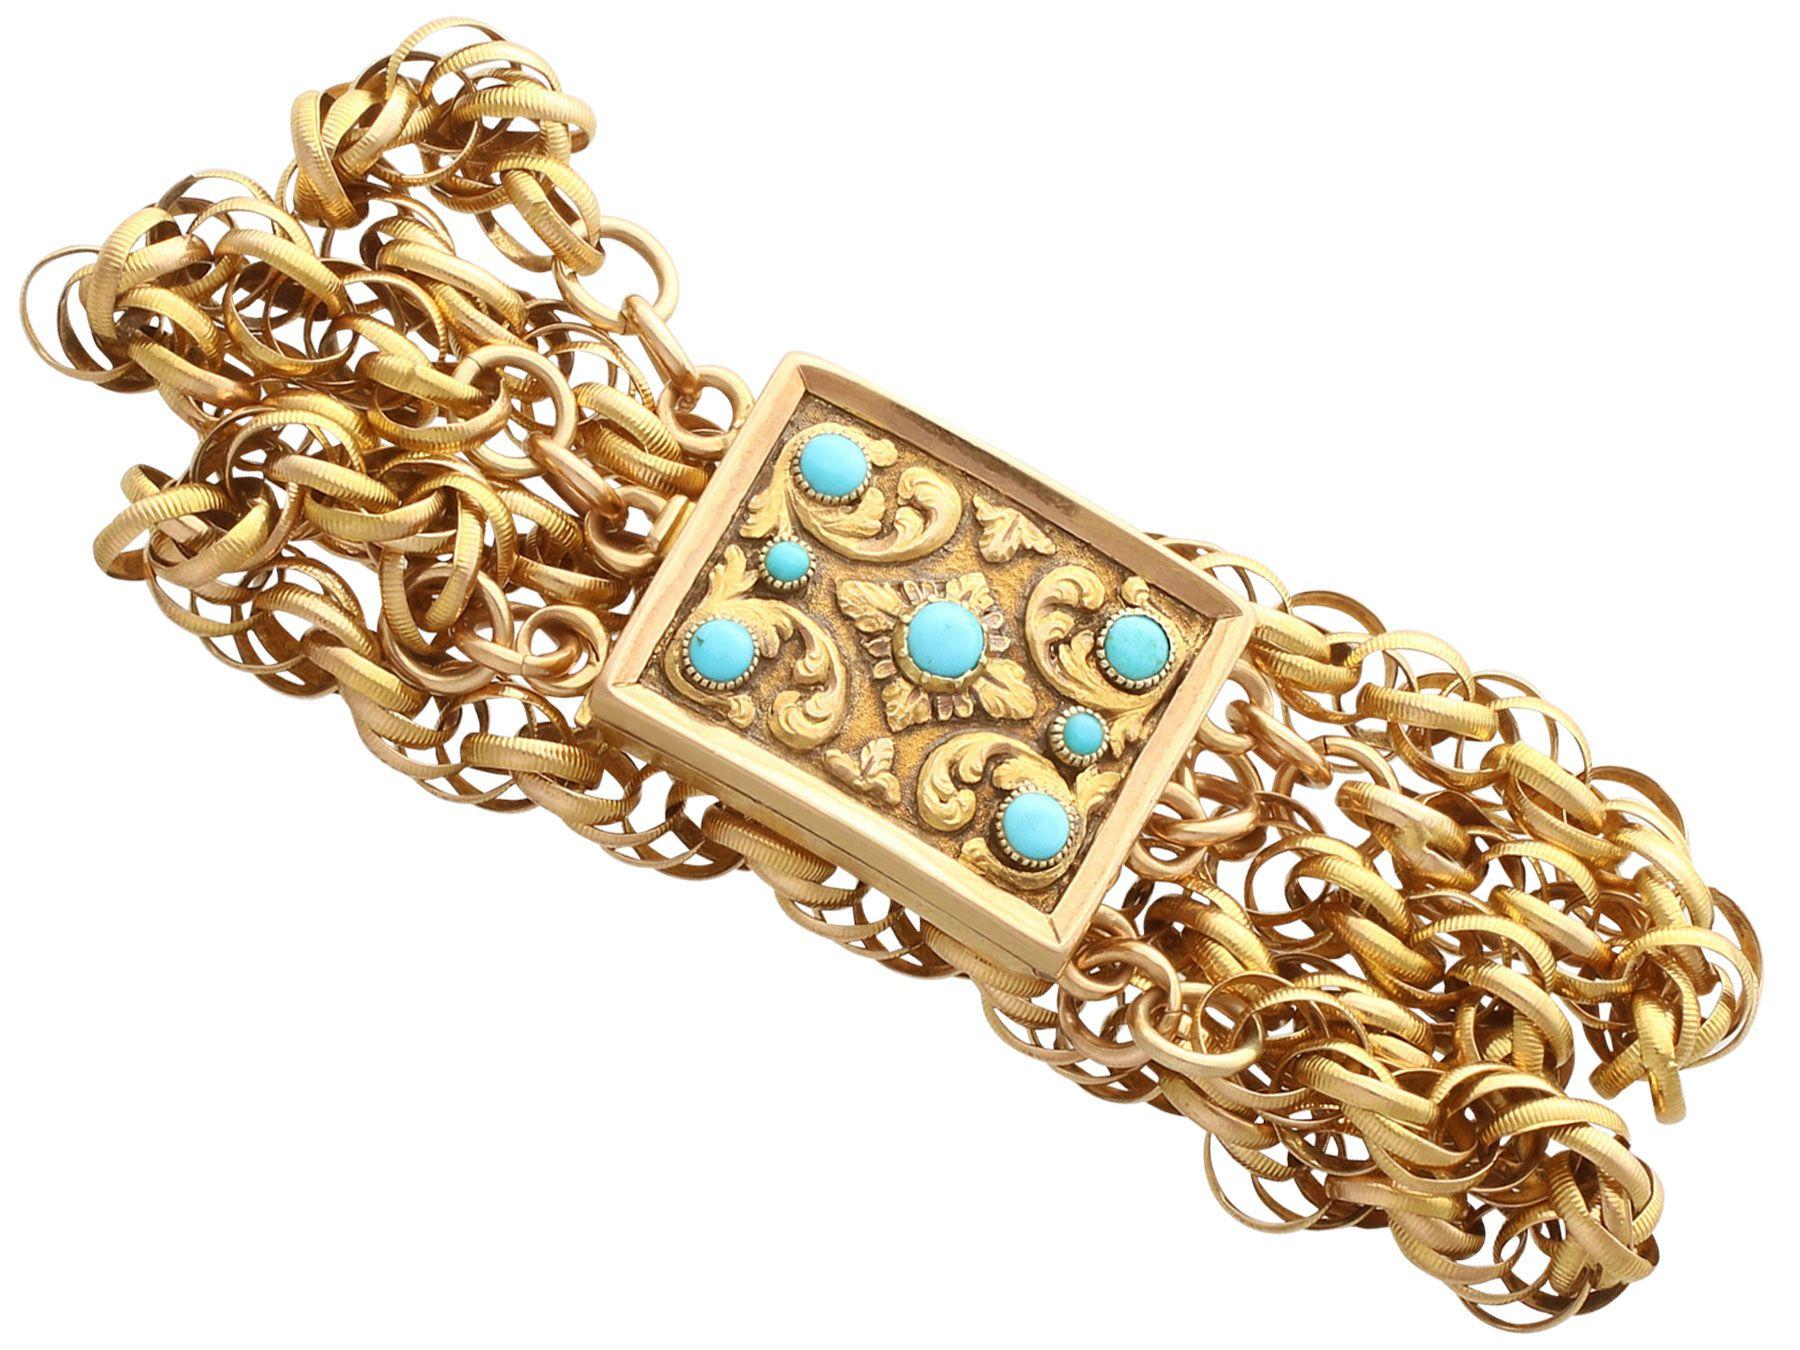 A stunning antique George IV turquoise and 18 karat yellow gold bracelet with a mourning locket clasp; part of our diverse antique jewelry and estate jewelry collections.

This stunning, fine and impressive mourning bracelet has been crafted in 18k